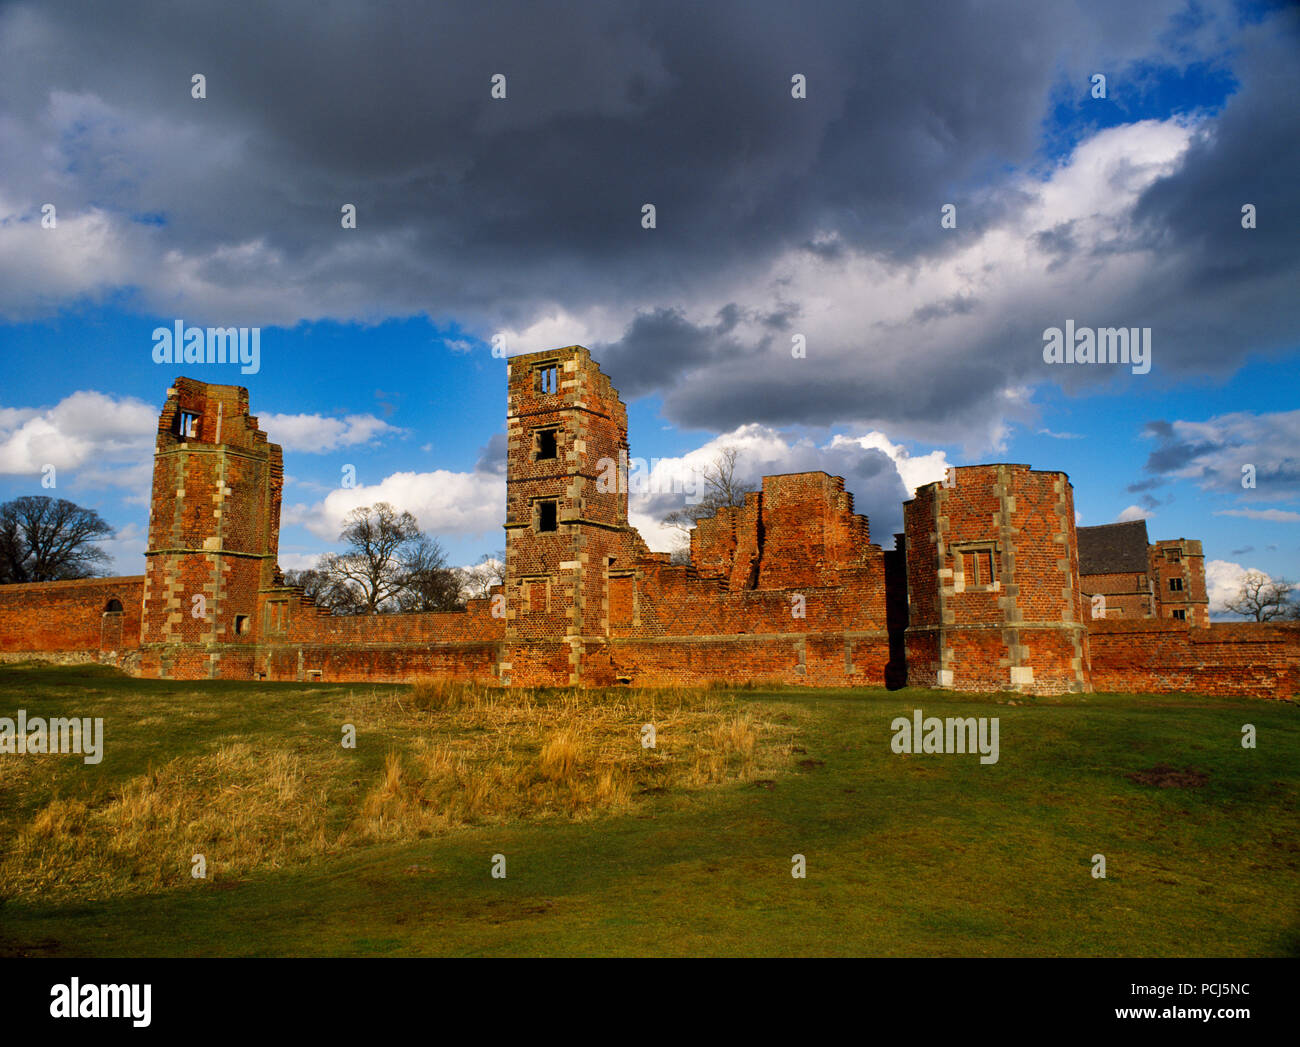 View NE of Bradgate House, Leicestershire, UK, childhood home of Lady Jane Grey: 16-year-old uncrowned 'Queen of England' for 9 days 10-19 July 1553. Stock Photo